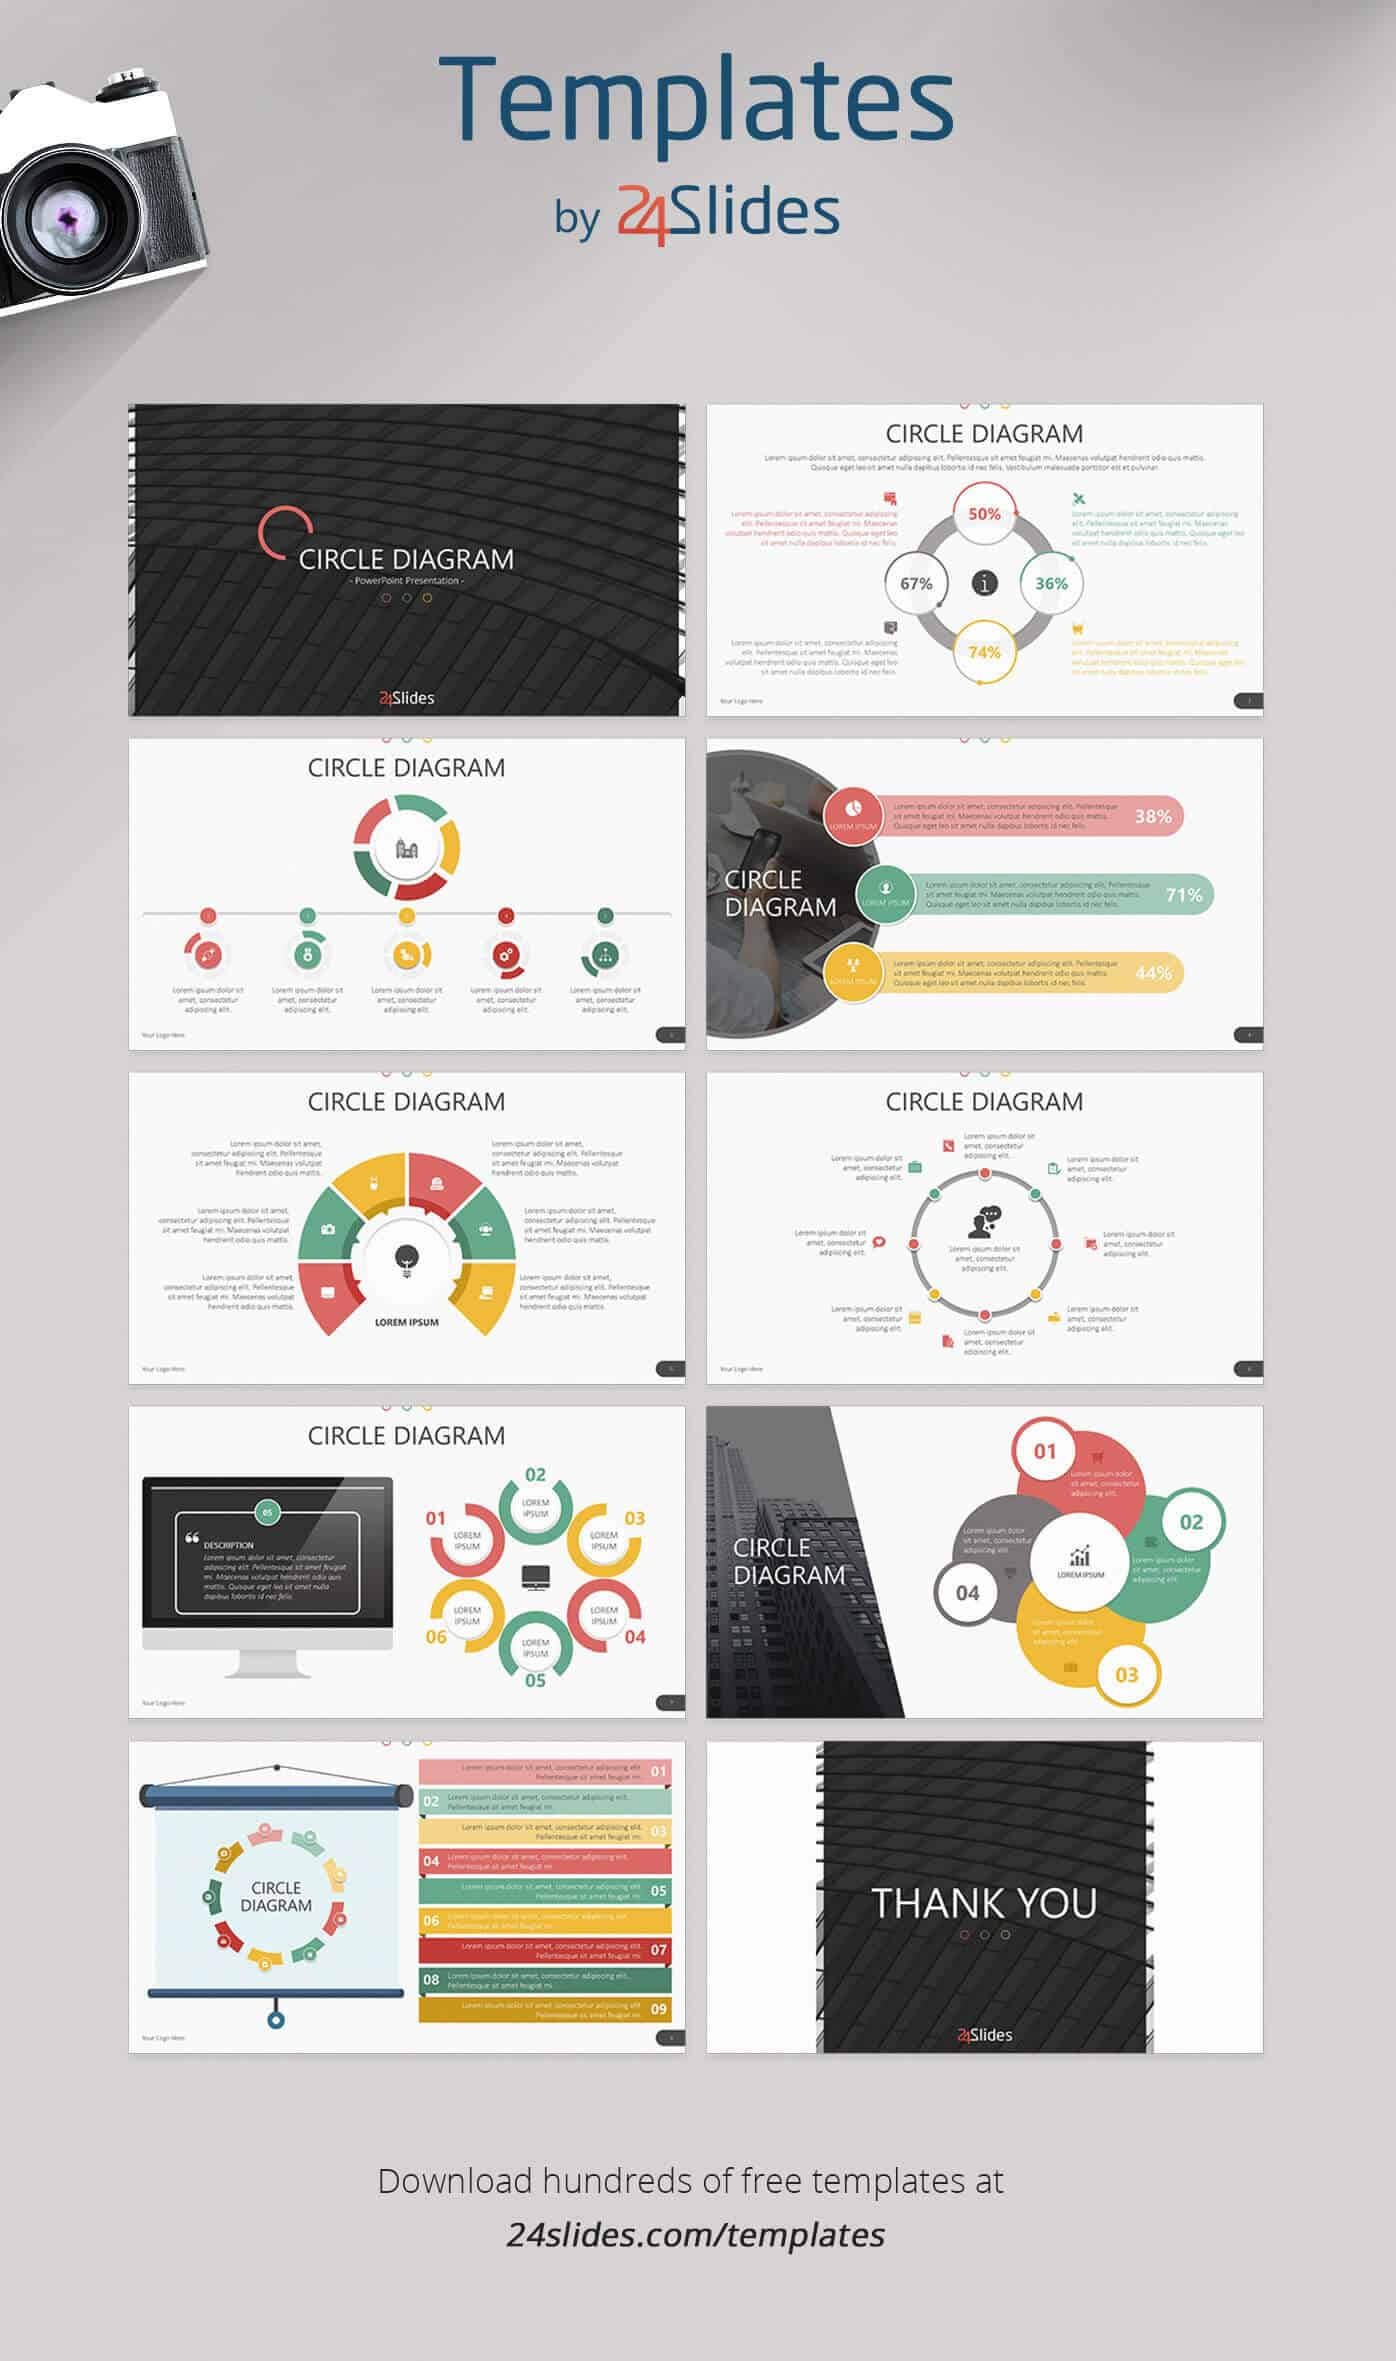 15 Fun And Colorful Free Powerpoint Templates | Present Better With Powerpoint Photo Slideshow Template